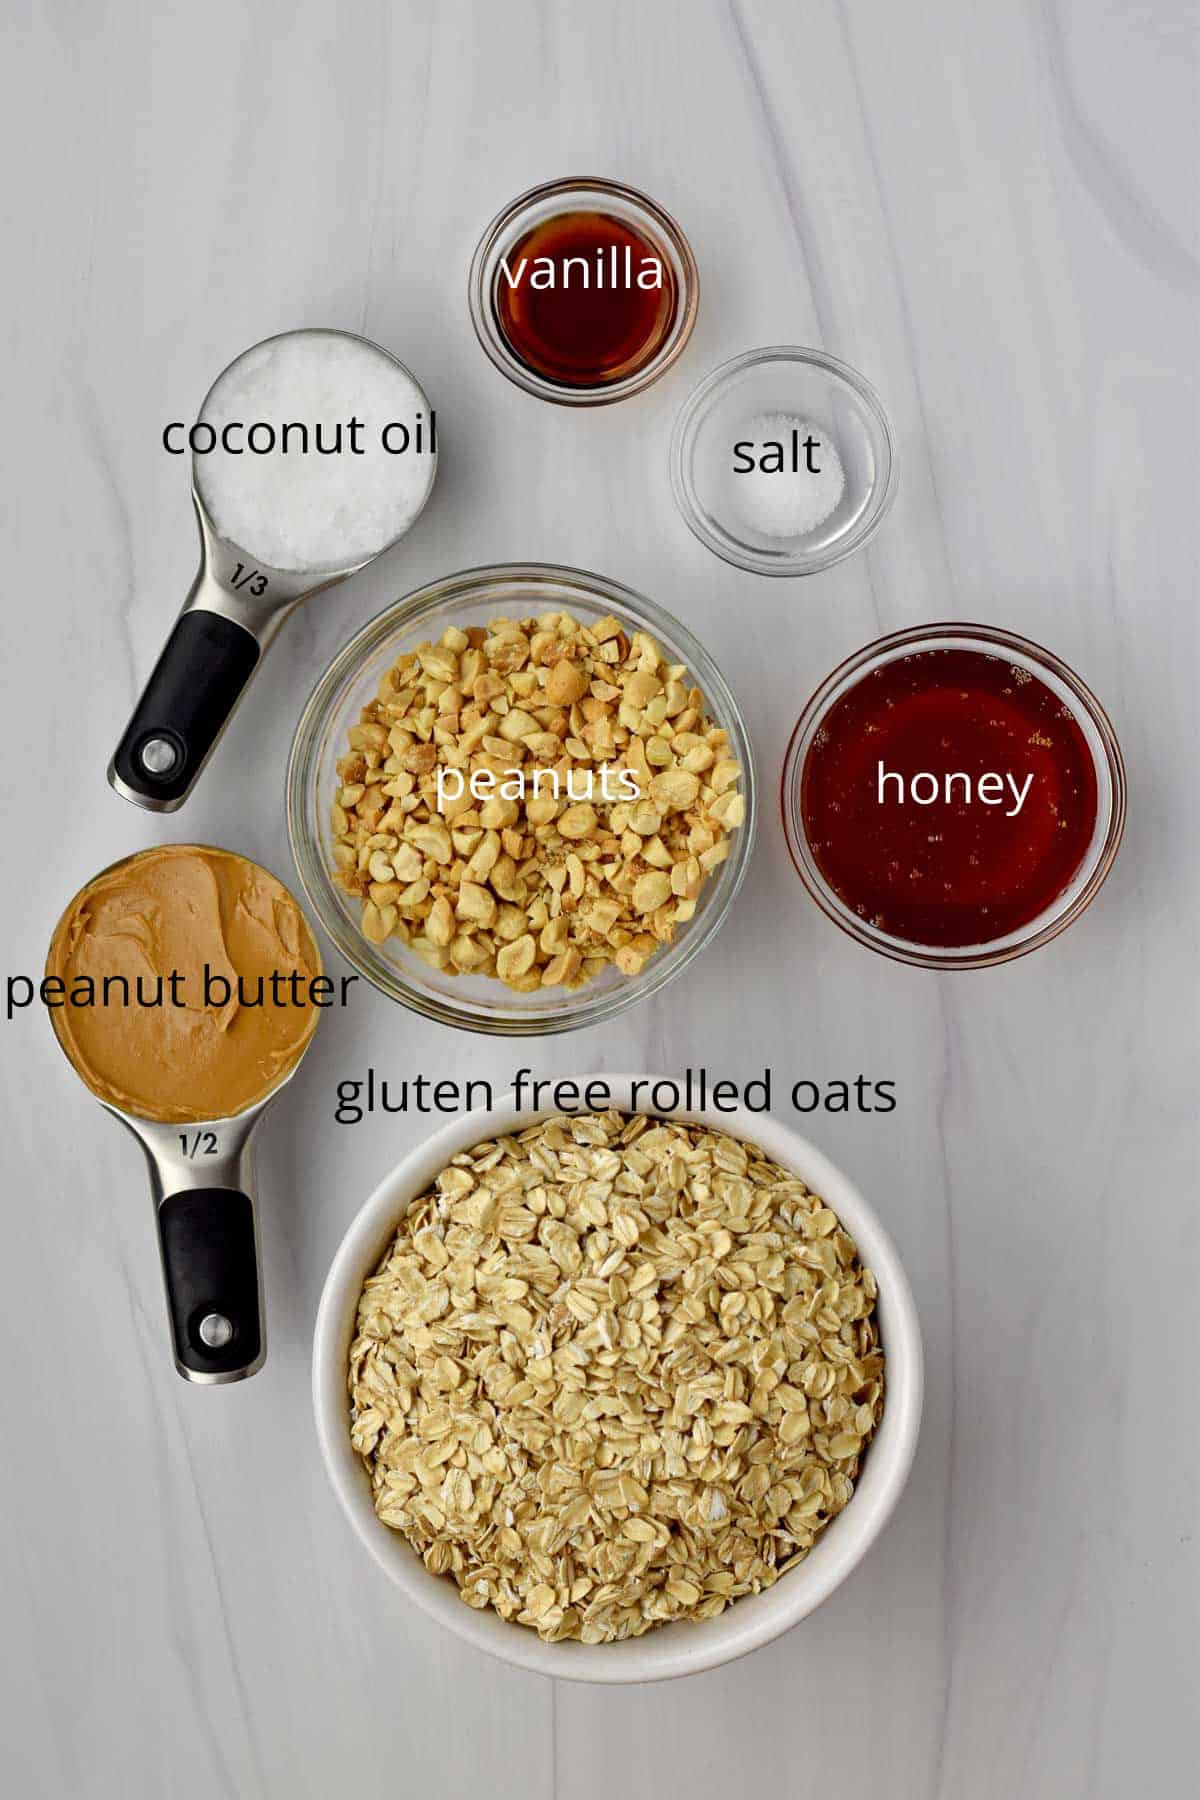 Ingredients, with labels, for peanut butter granola.